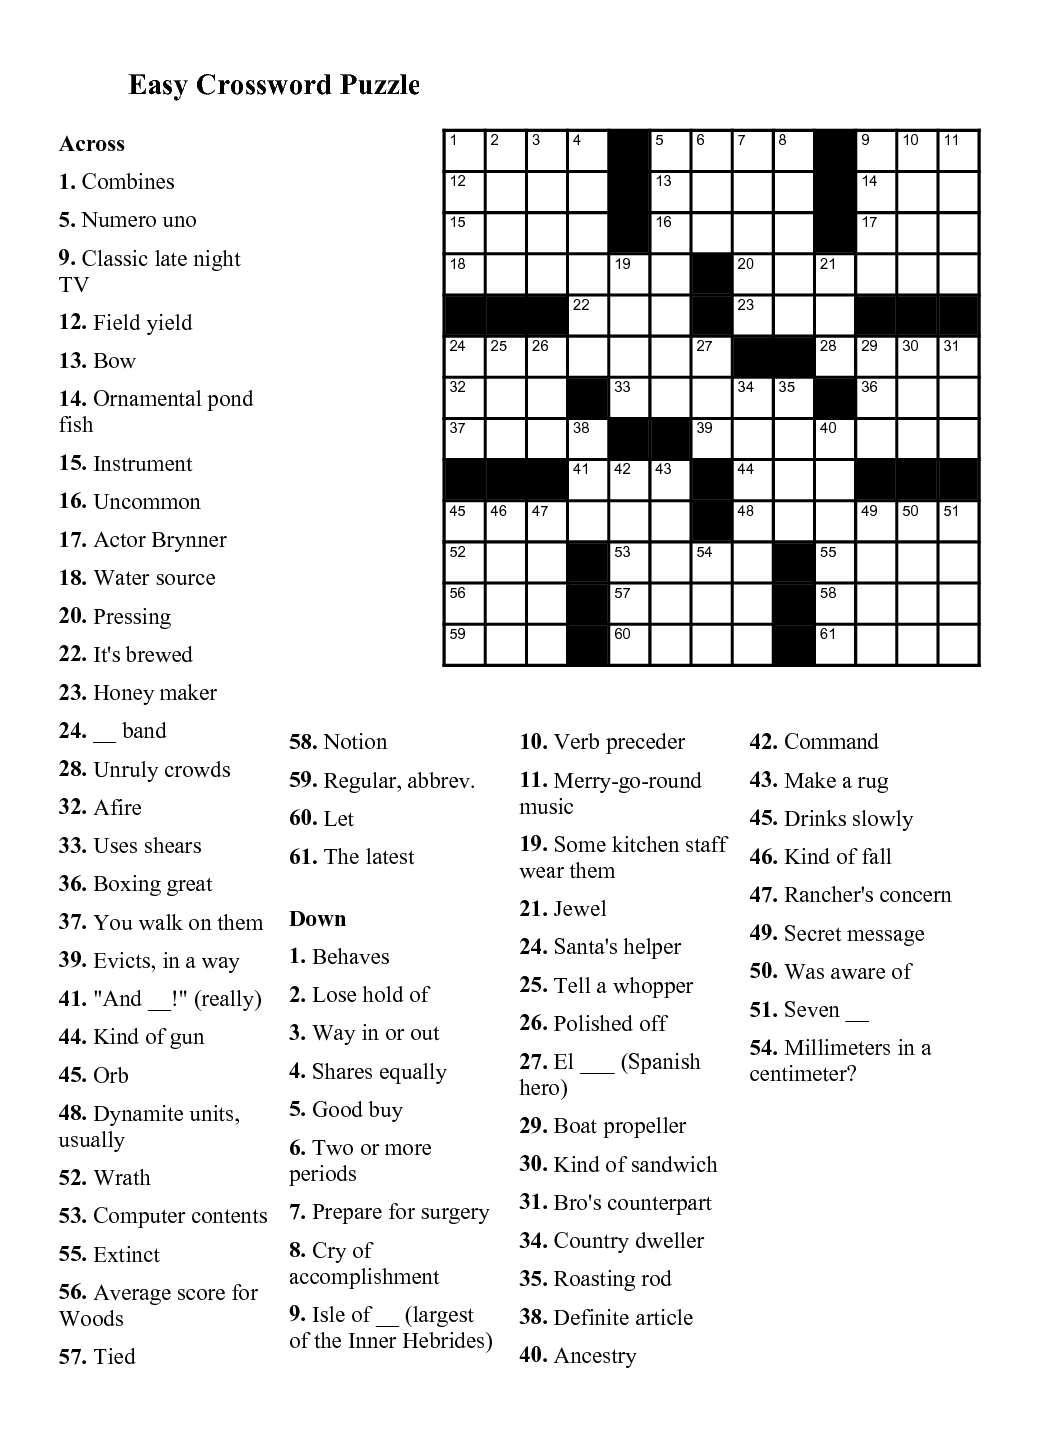 Easy Crossword Puzzles Printable Daily Template - Free Crossword Easy